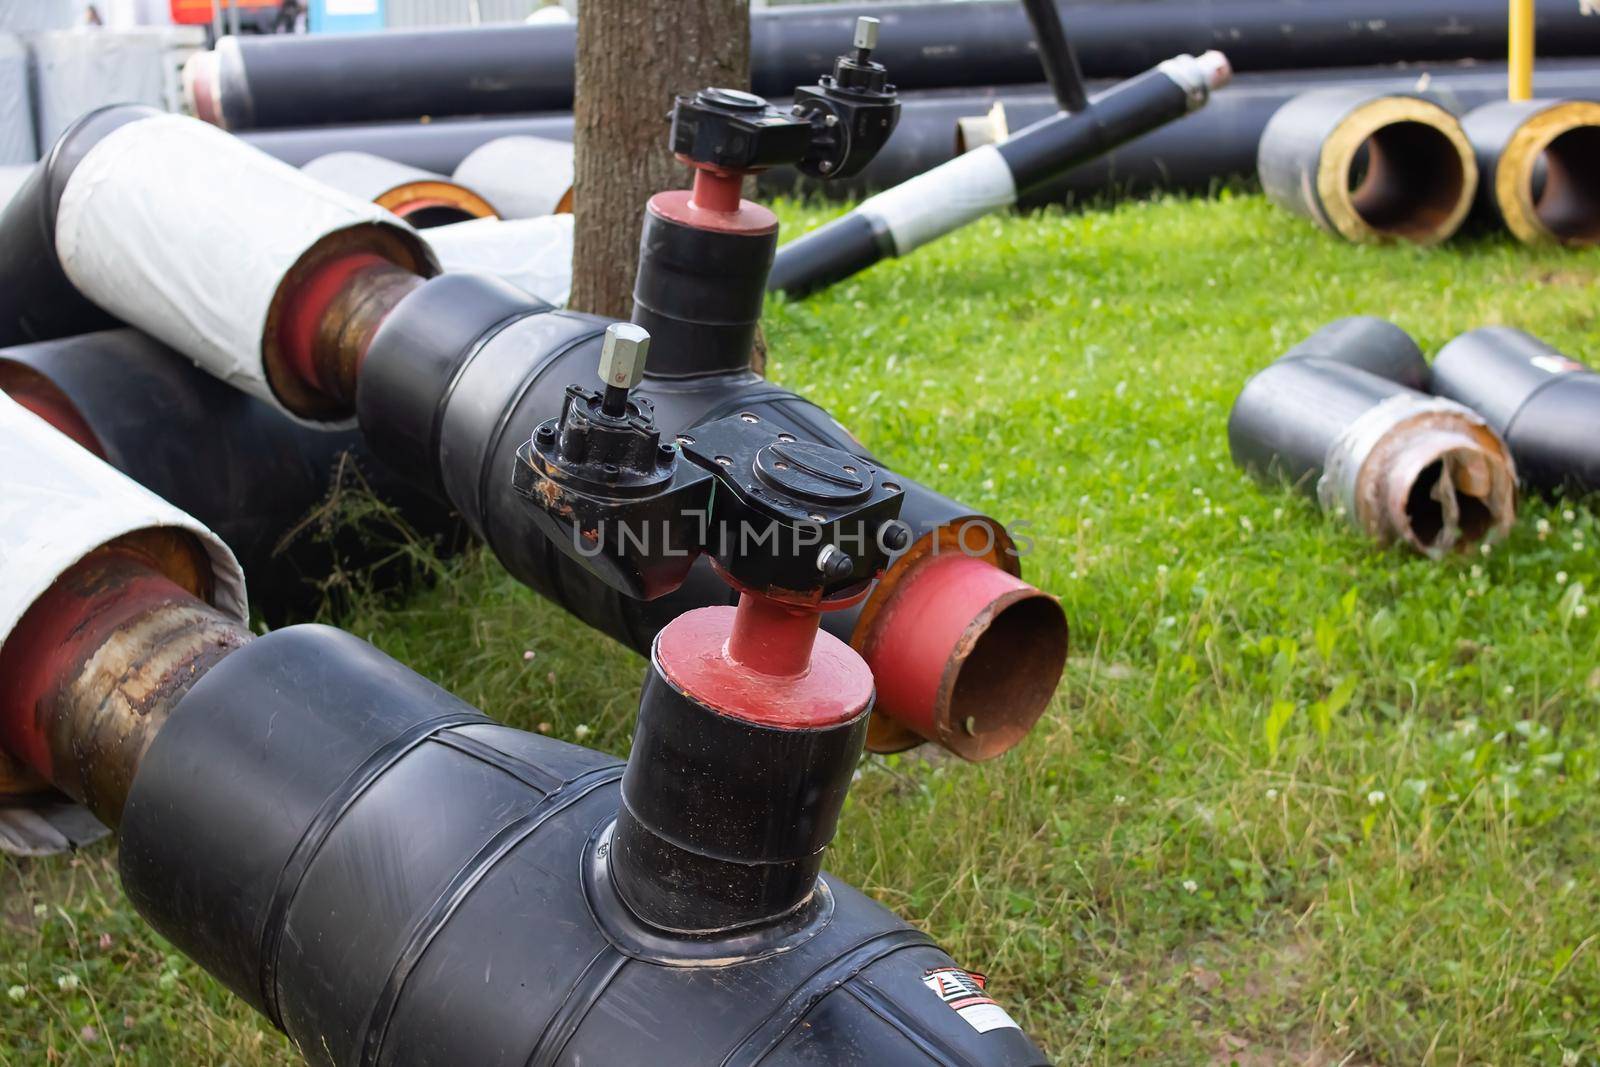 New pipes for water pipes with insulation on grass close up